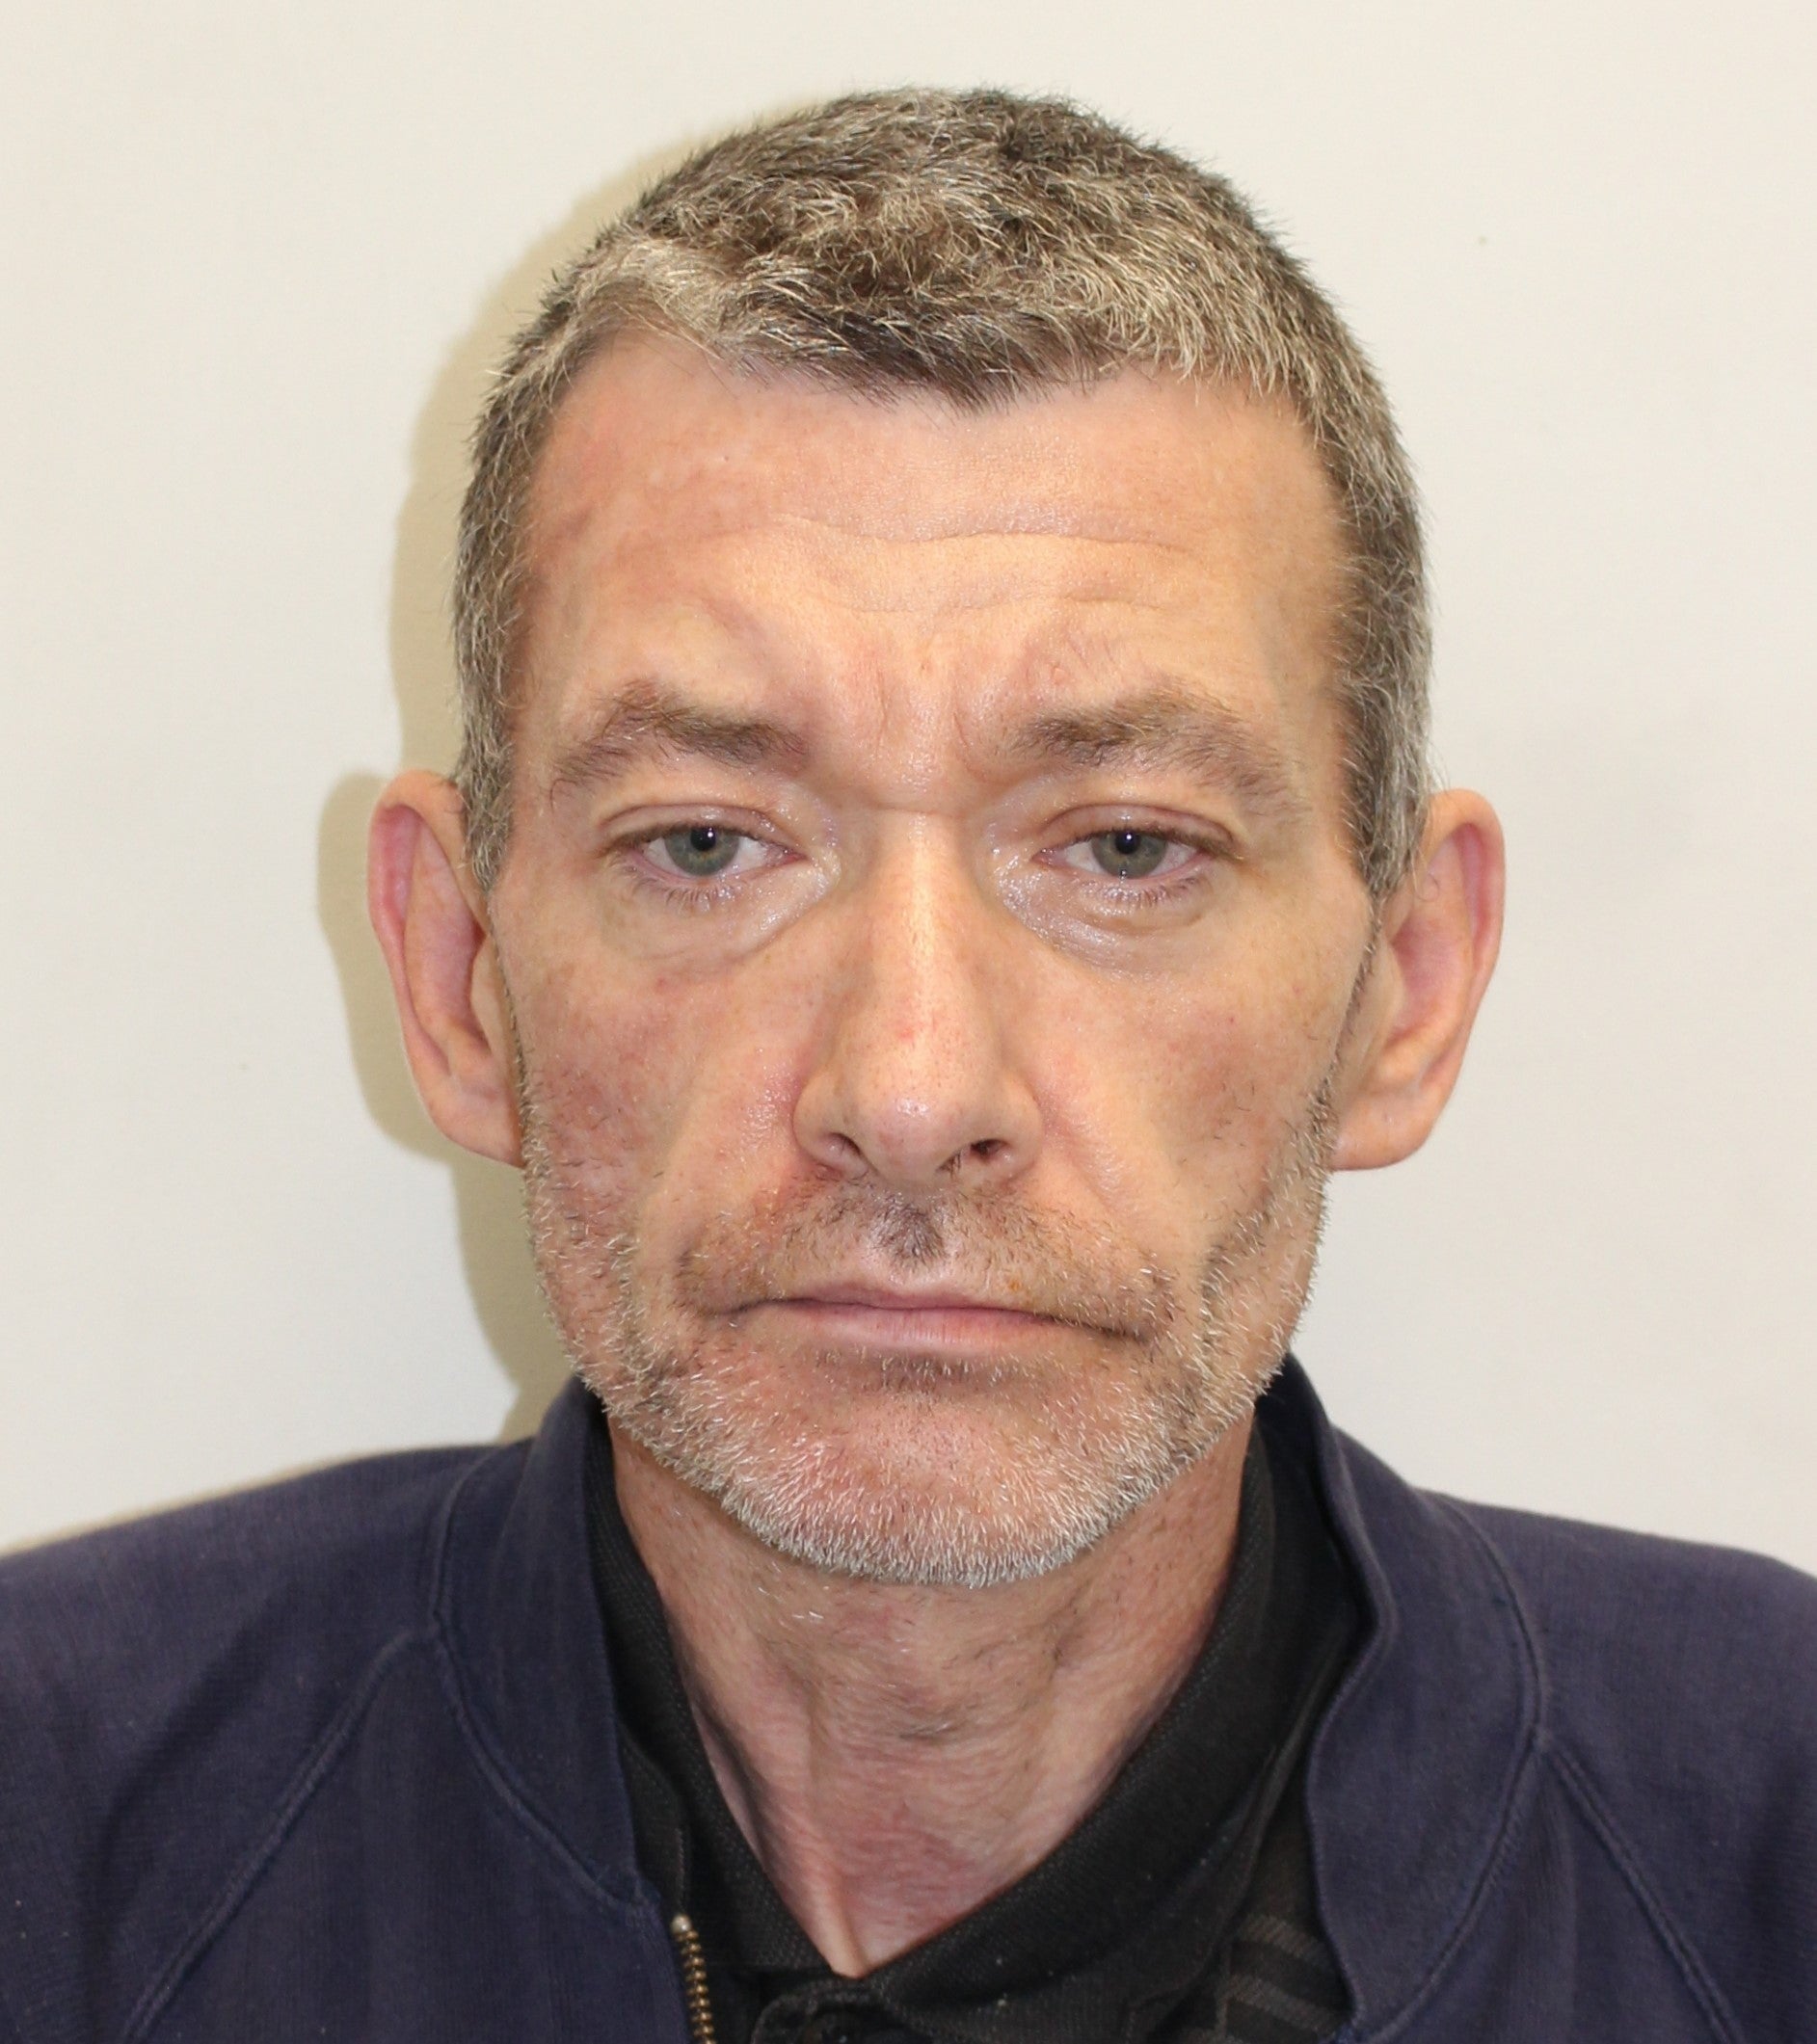 Karl Giddings has been jailed for nine years with an additional five years on licence